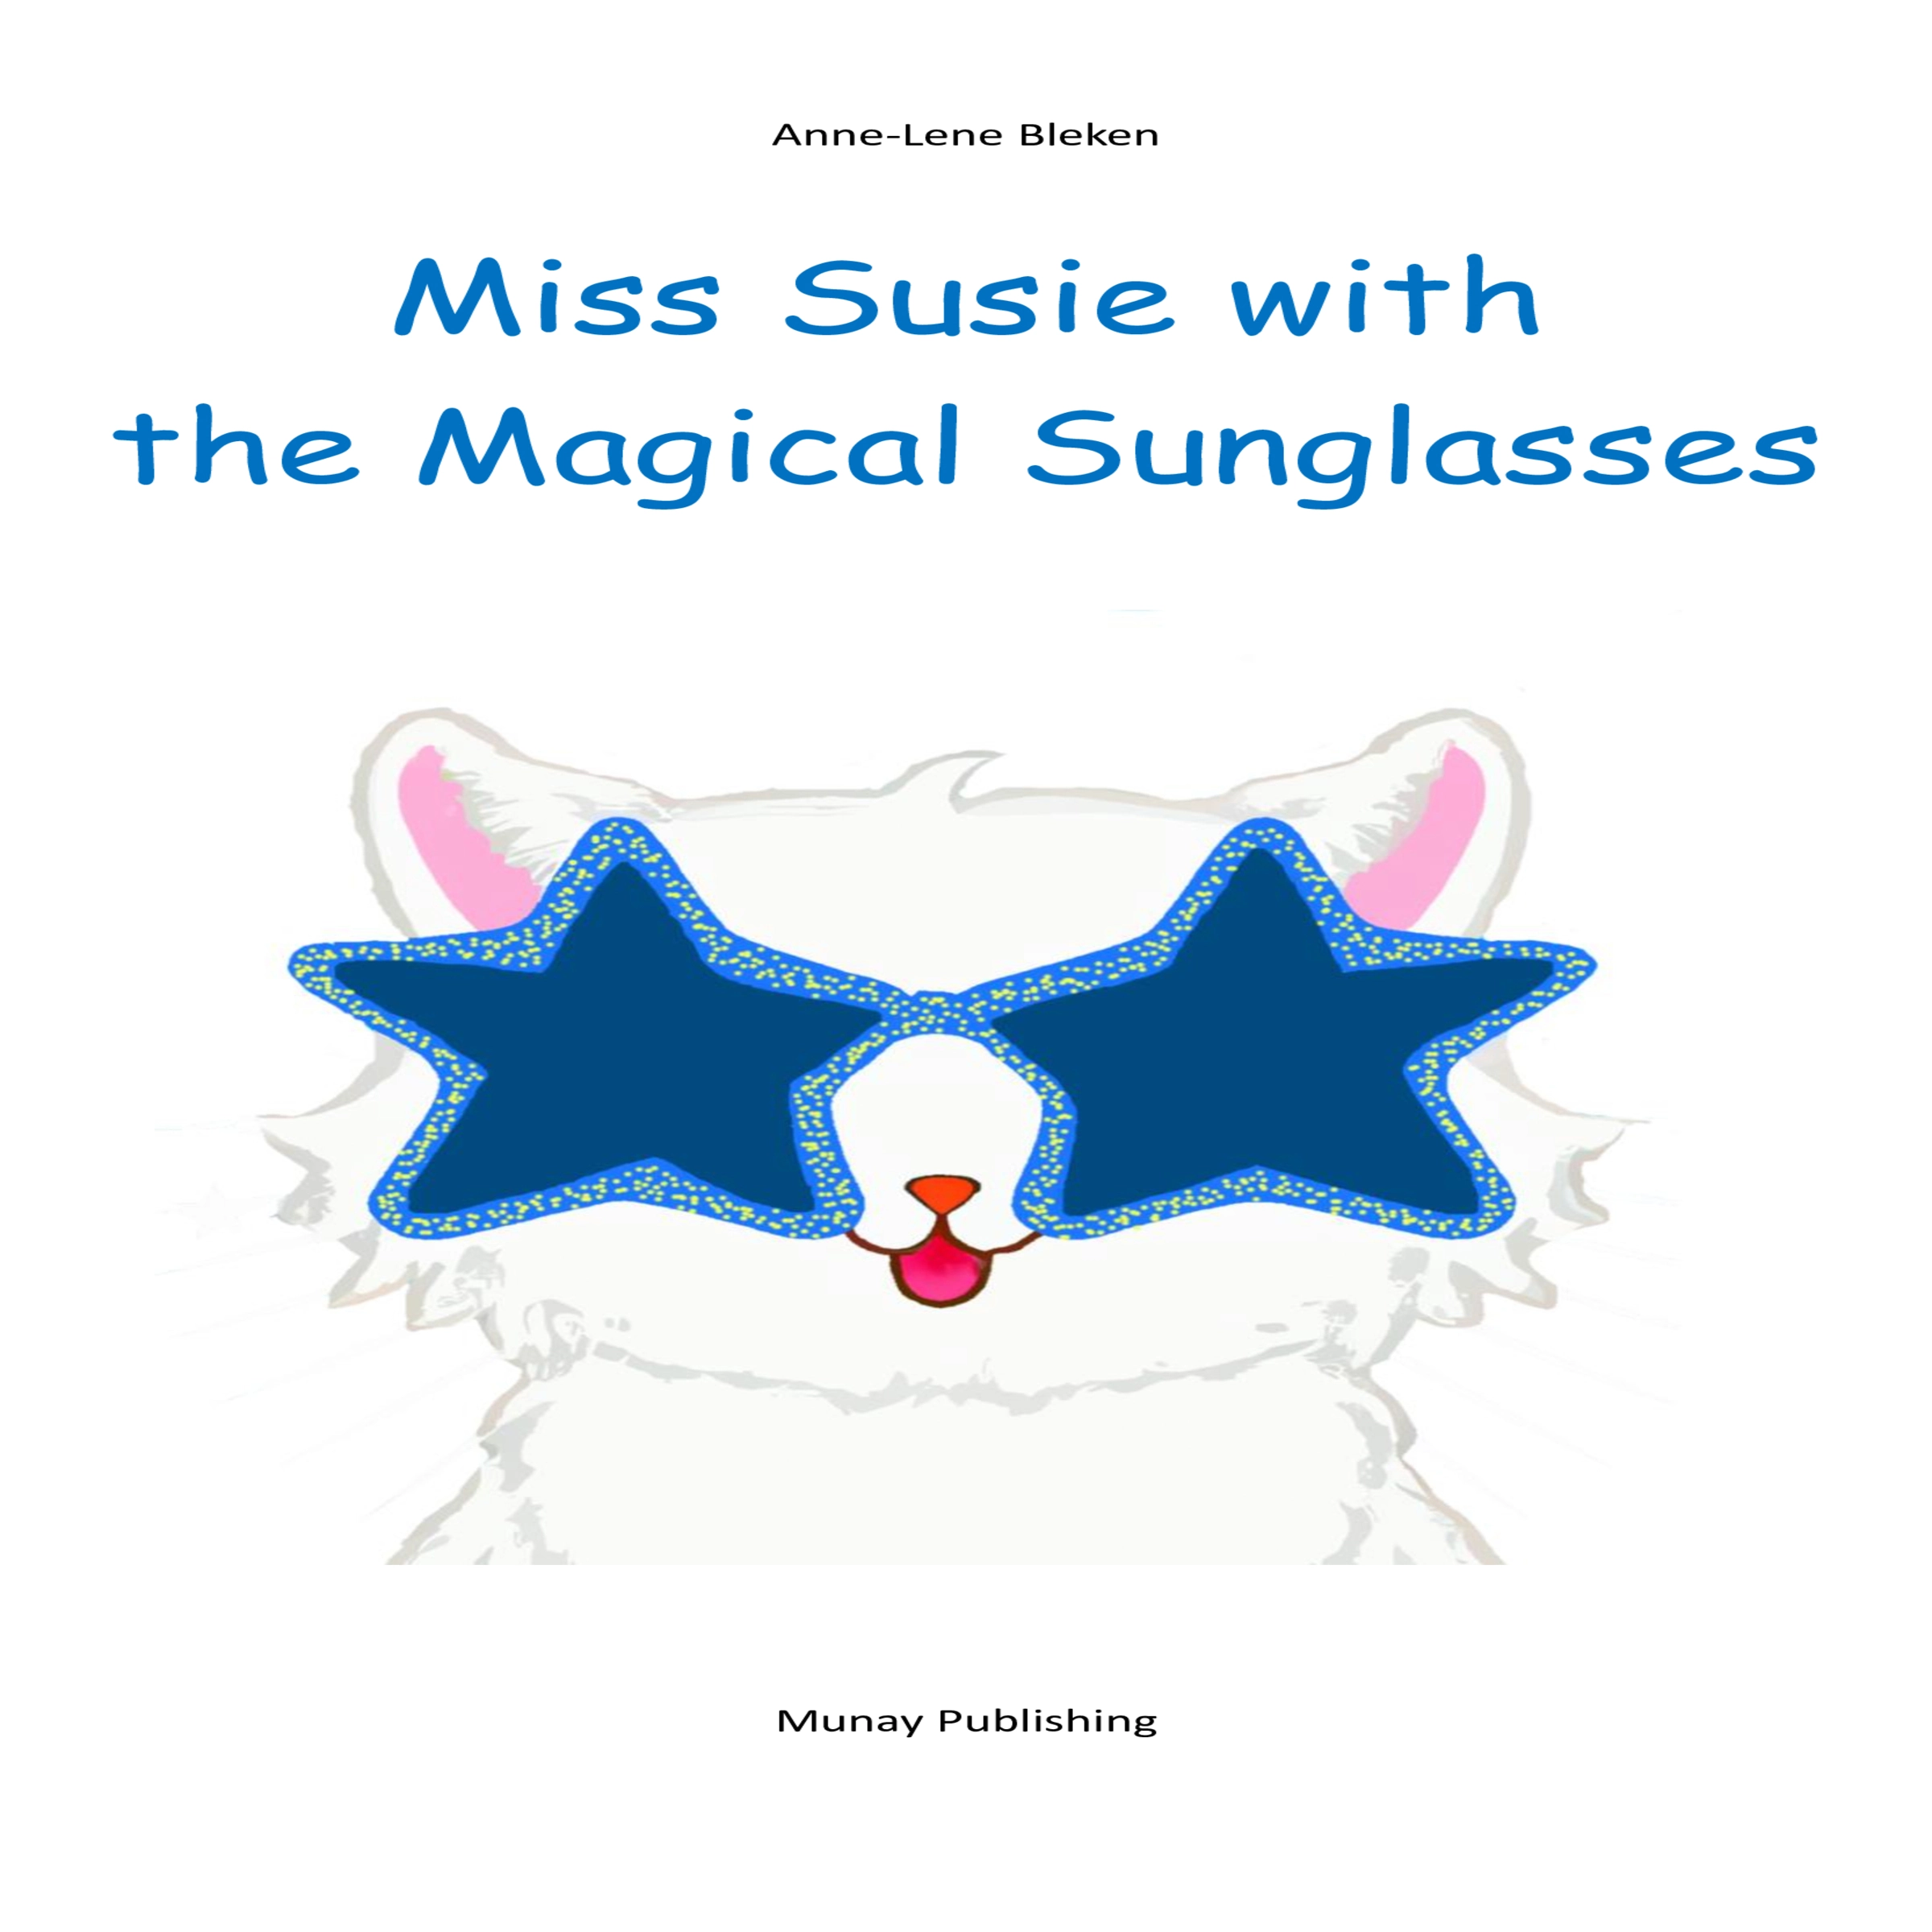 Miss Susie with the Magical Sunglasses Audiobook by Anne-Lene Bleken